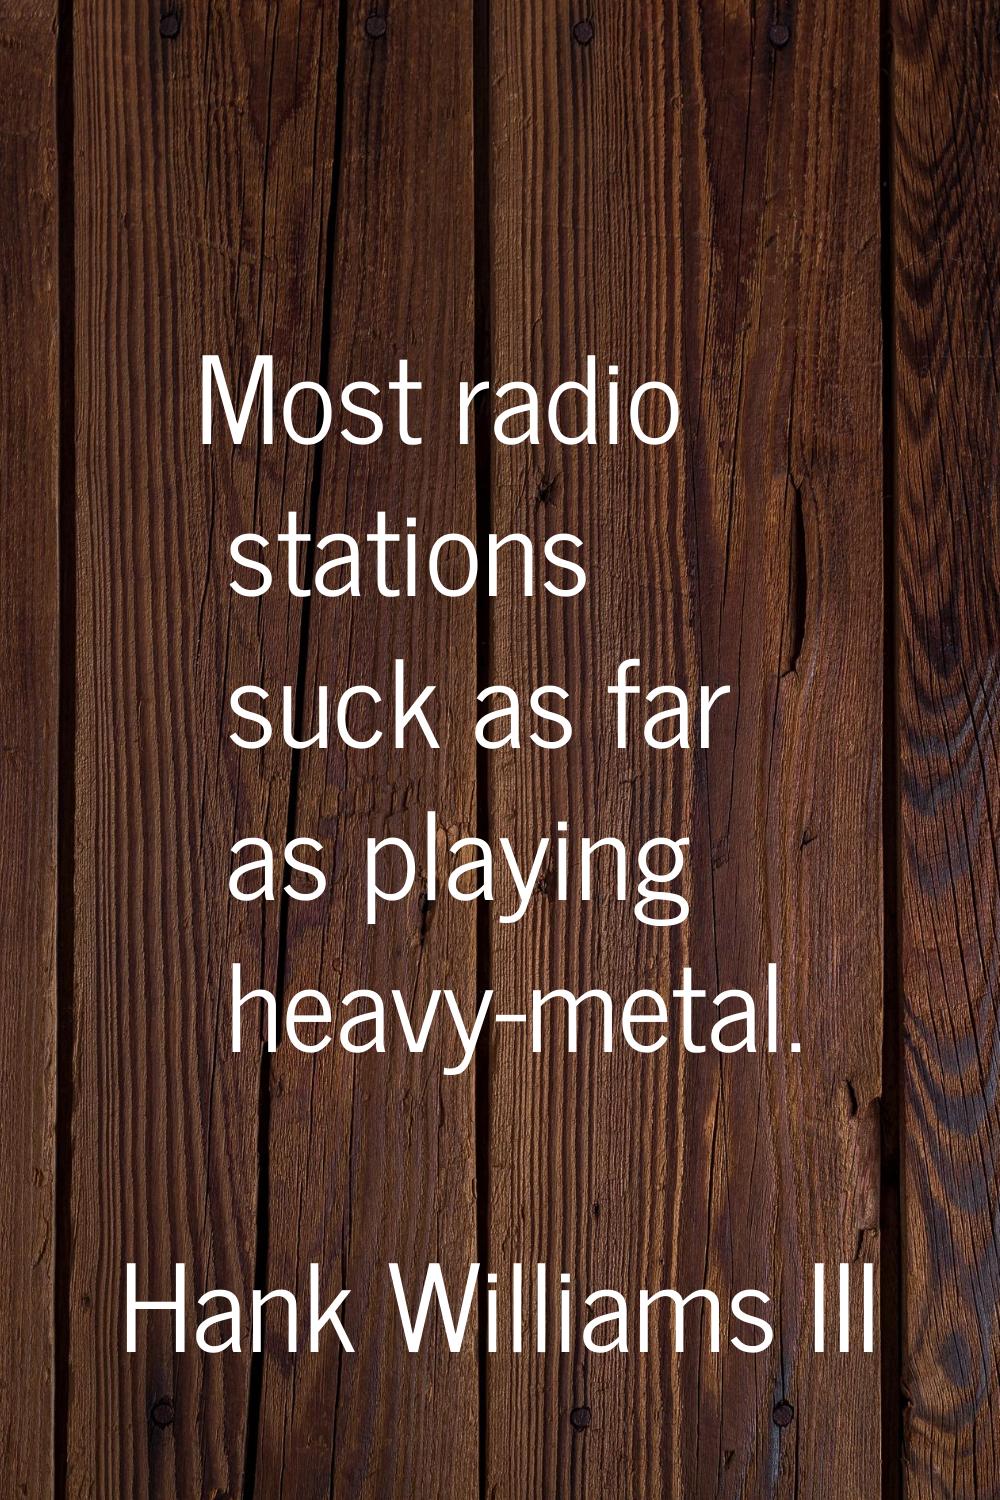 Most radio stations suck as far as playing heavy-metal.